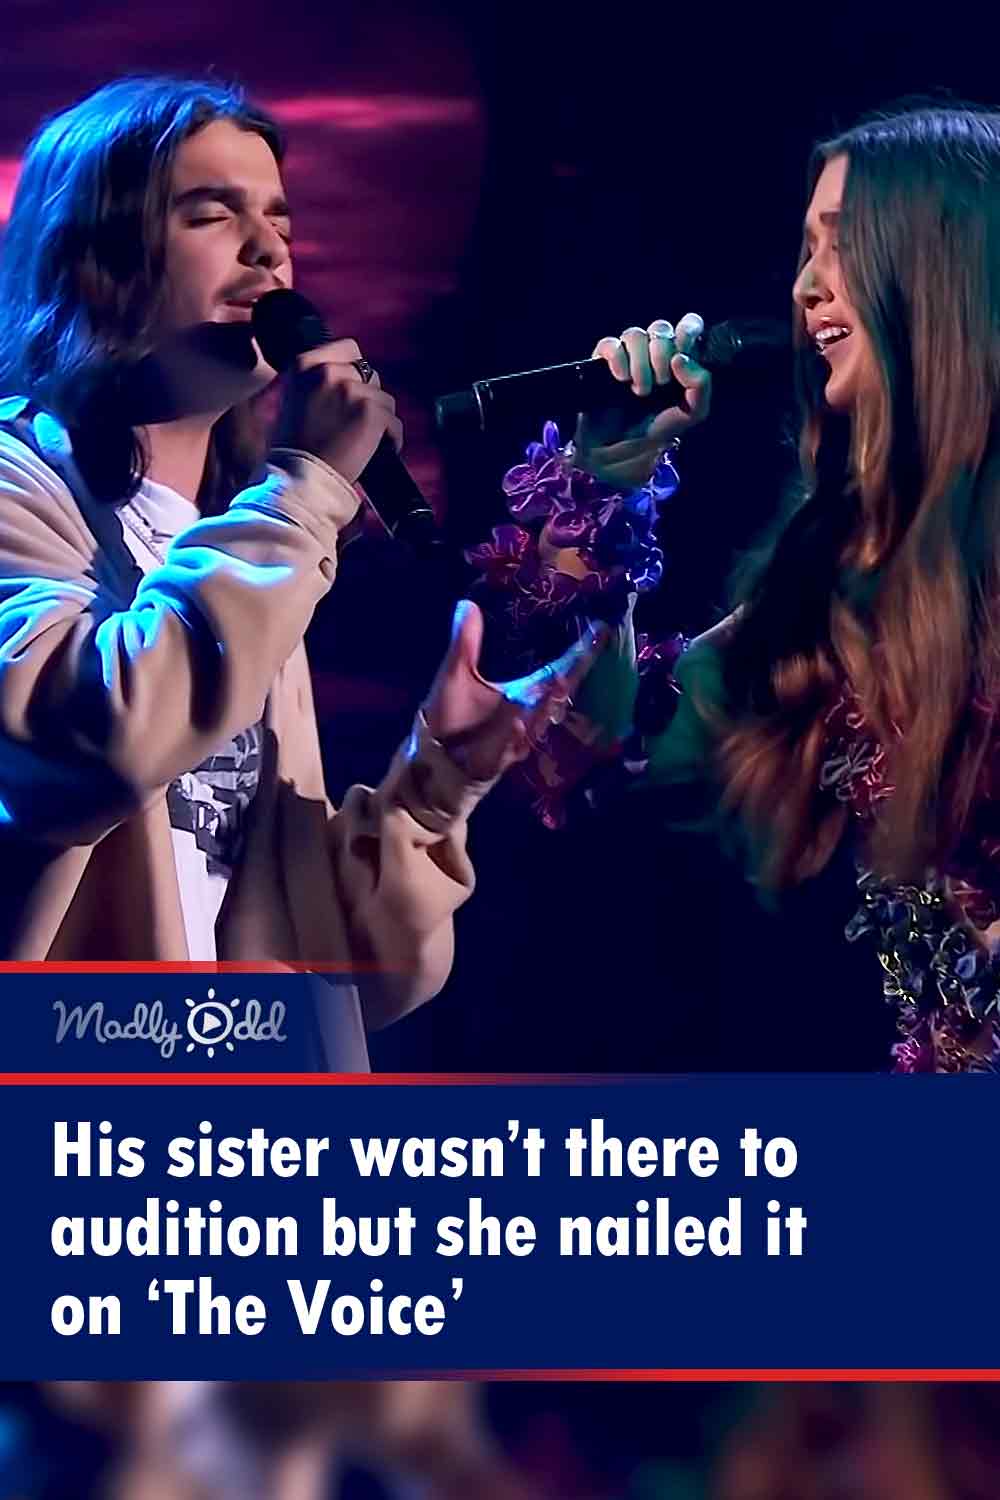 His sister wasn’t there to audition but she nailed it on ‘The Voice’